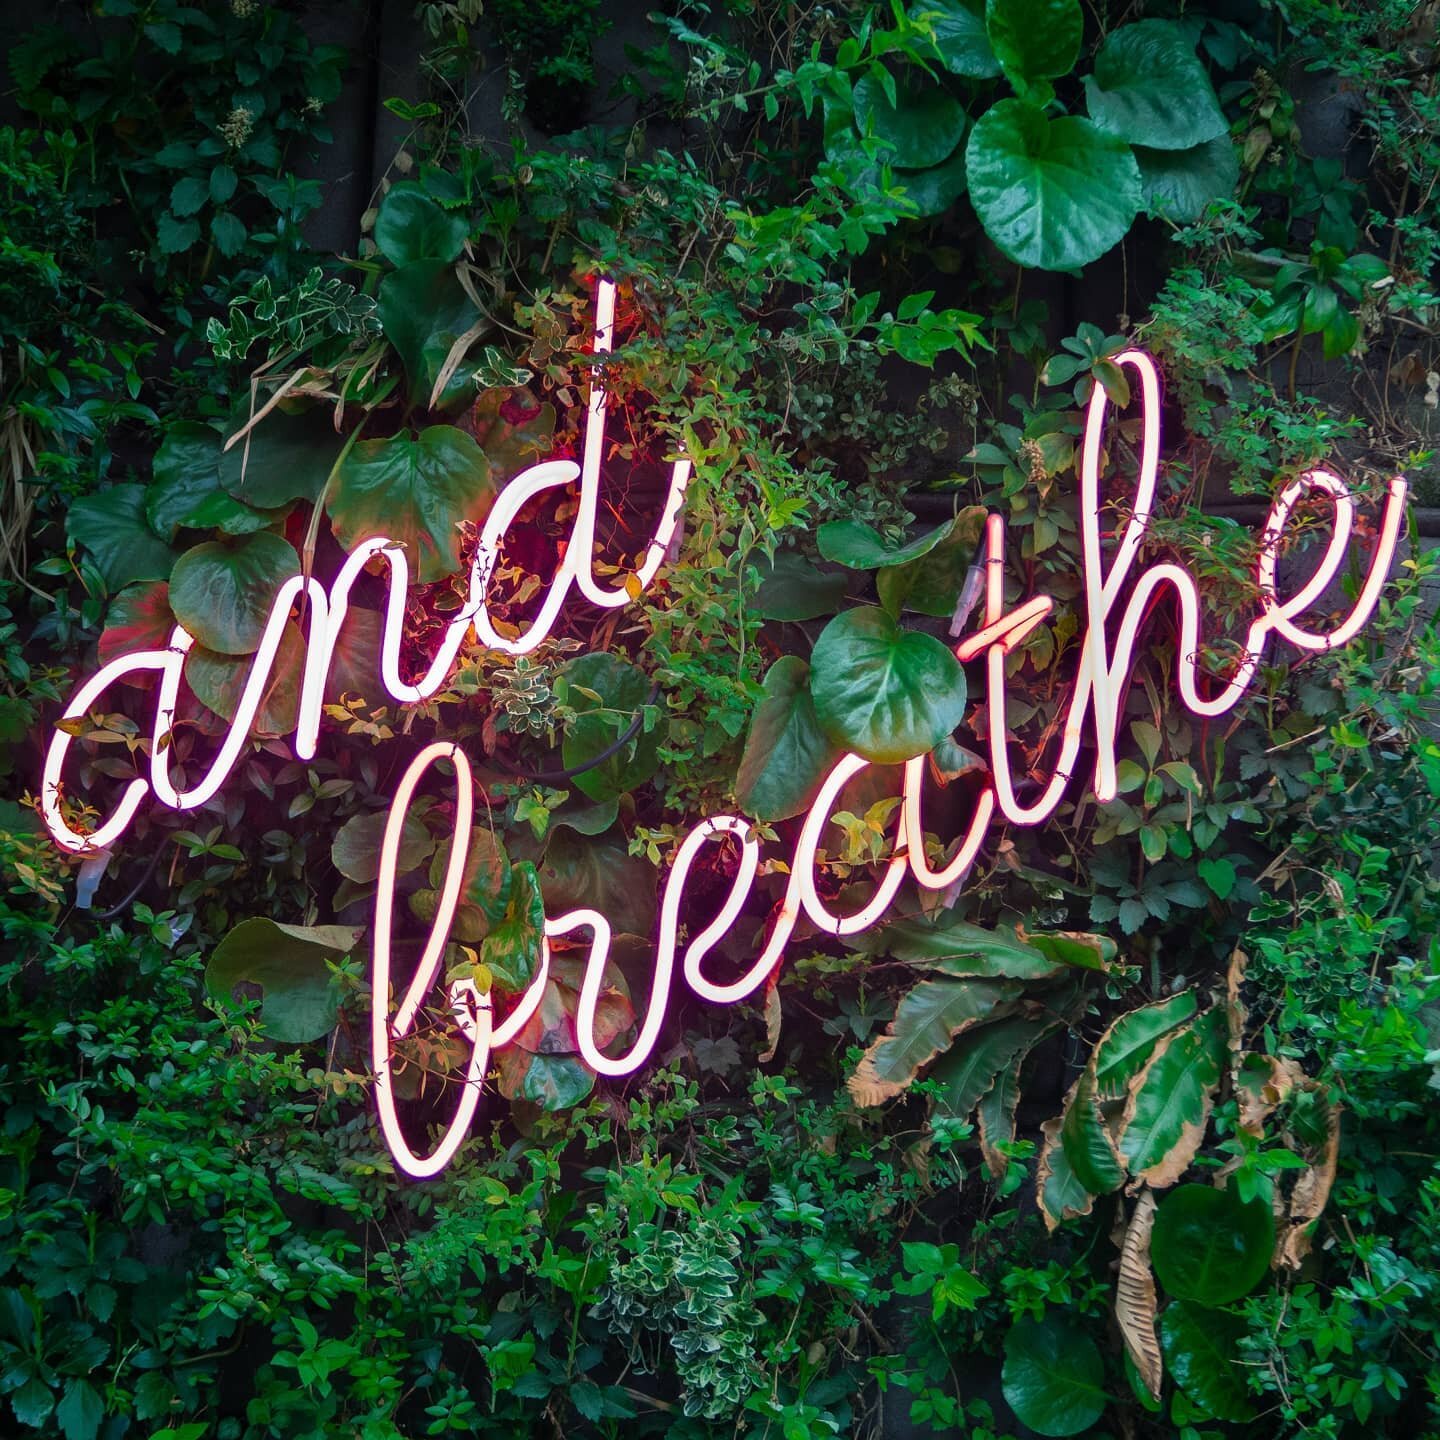 Catch your breath and breathe deeply, it's the weekend and time to slow your schedule down.

Do you have a weekend tradition that helps you to relax? For me I like a disco clean... I know I sound mad but at the end of a week my house looks such a mes